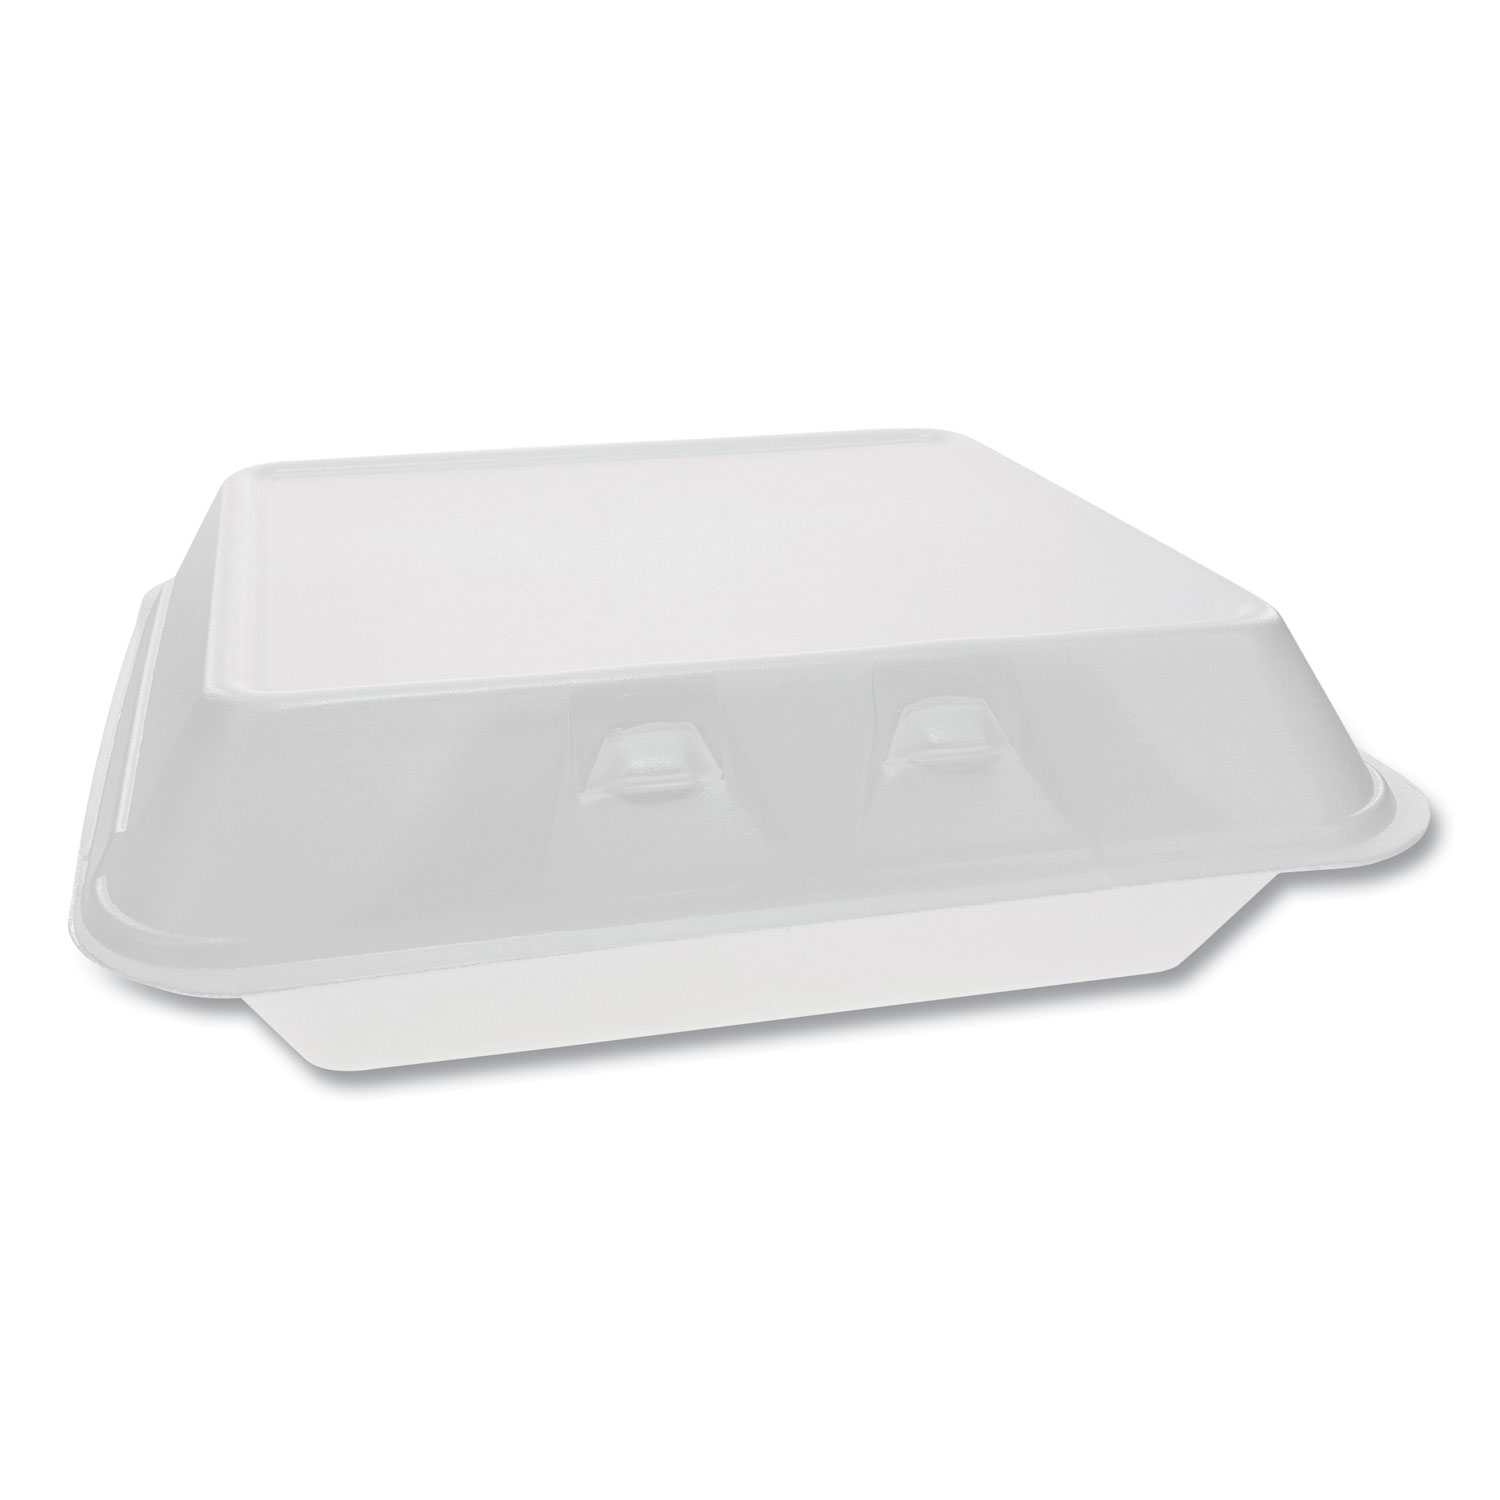 Pactiv SmartLock Foam Hinged Containers, X-Large, 9.5 x 10.5 x 3.25, 1-Compartment, White, 250/Carton